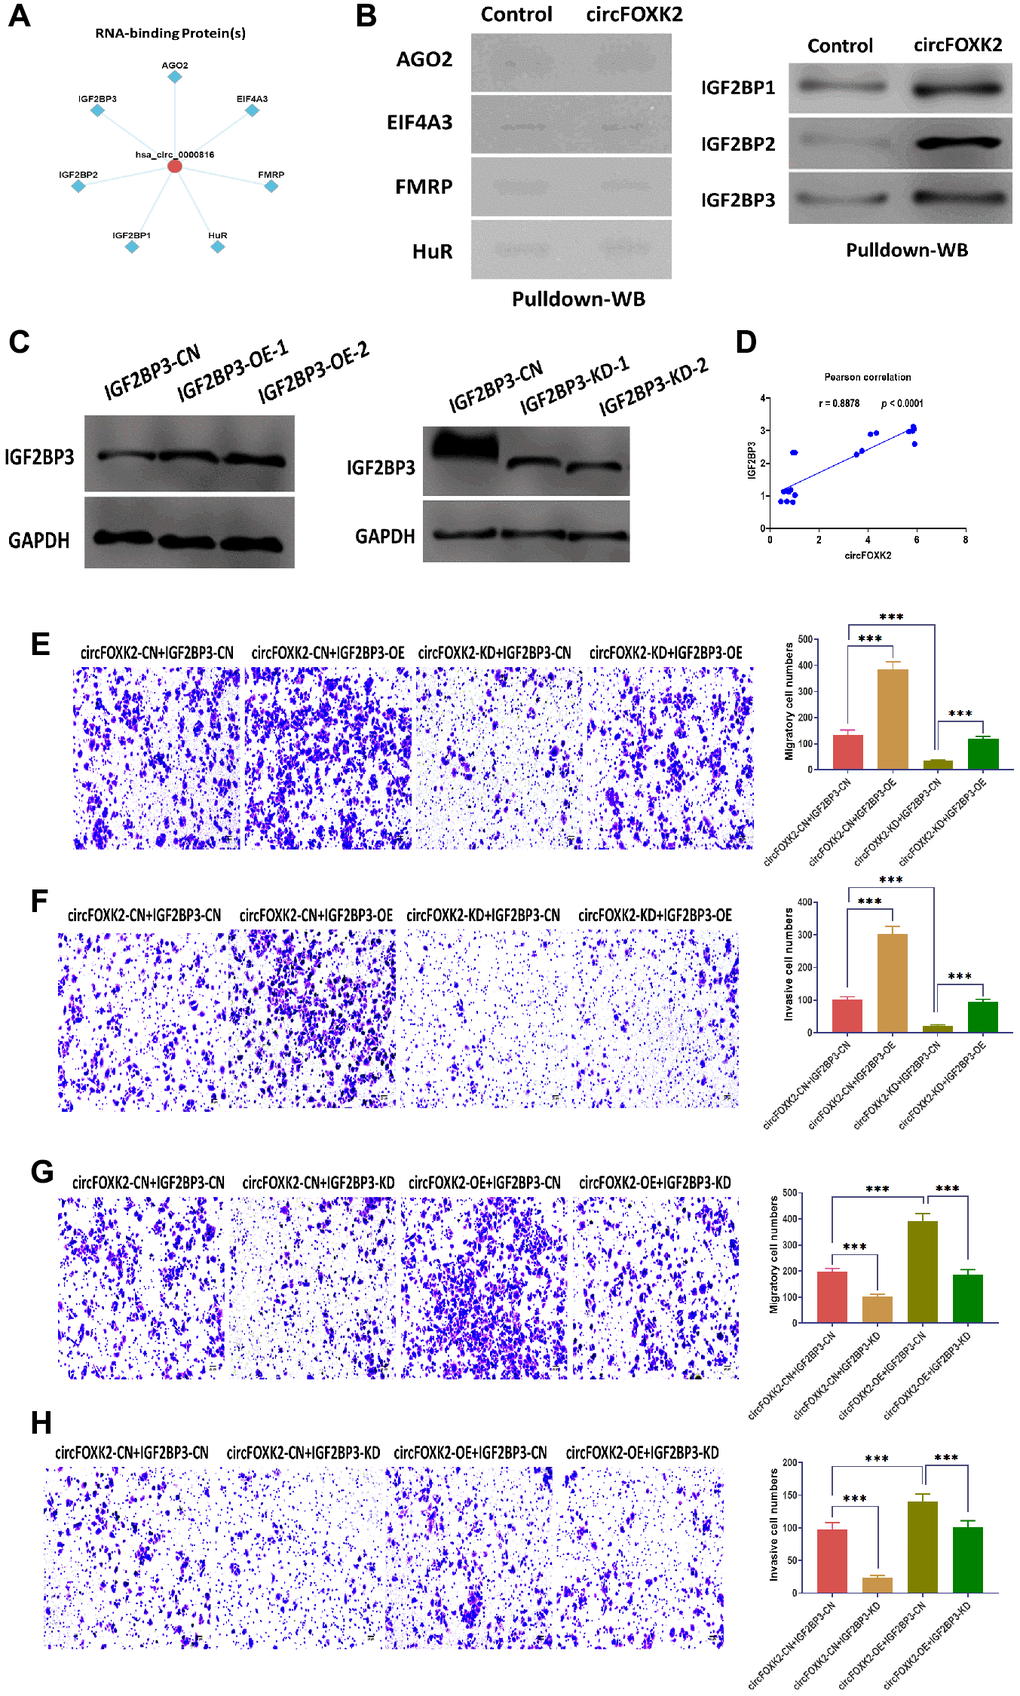 IGF2BP3 is critical for the effect of circFOXK2 on BC metastasis. (A) Prediction of RNA-binding proteins of circFOXK2. (B) Interaction between circFOXK2 and IGF2BP1, IGF2BP2, IGF2BP3, EIF4A3, FMRP, HuR, and AGO2, as determined by RNA pulldown and Western blotting assay. (C) Protein expression of IGF2BP3 in BT-549 cells transfected with IGF2BP3-expressing plasmids or IGF2BP3-specific small interfering RNA (siRNA). (D) Pearson correlation between the expressions of circFOXK2 and IGF2BP3. (E and G) Rescue experiments for the migration ability of BT-549 cells treated as indicated. Scale bar: 20 μm. (F and H) Rescue experiments for the invasion ability of BT-549 cells treated as indicated. Scale bar: 20 μm. Data were represented as mean ± SD. Each experimental group had at least three replicates. *p **p ***p 